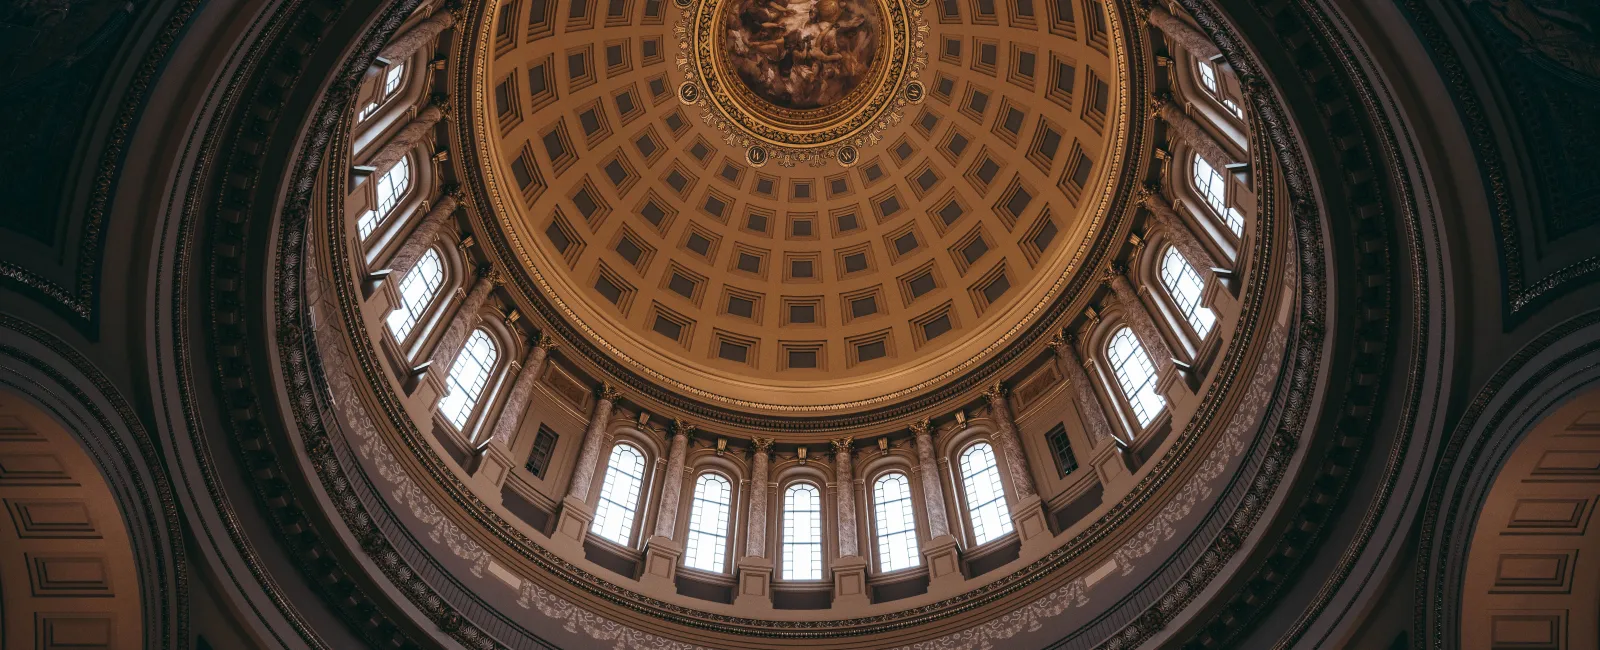 a dome with a design on it